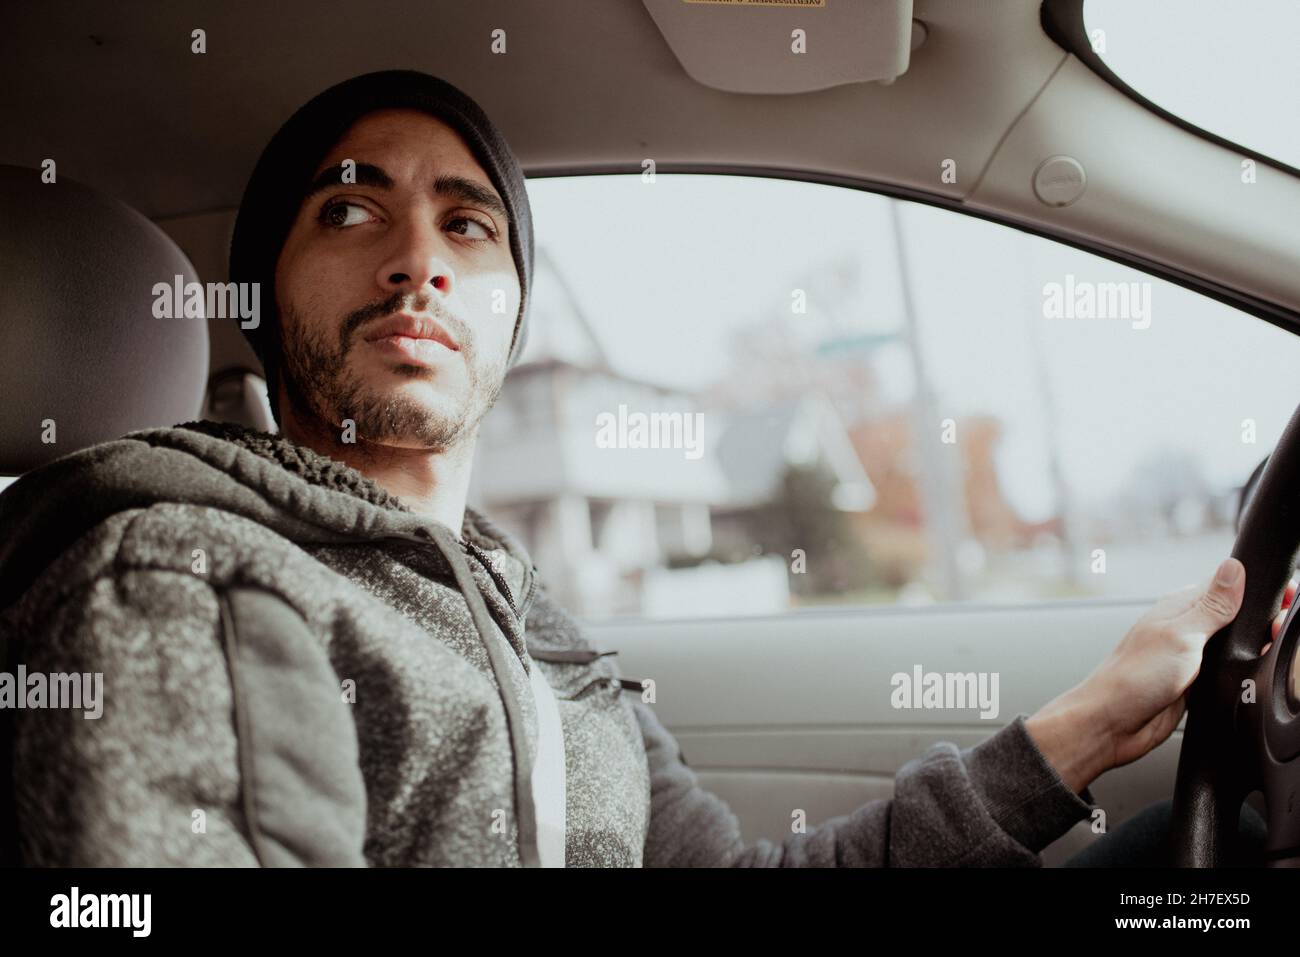 30-something mixed-race young millennial man driving in an older car to run errands. Serious expression while navigating Stock Photo